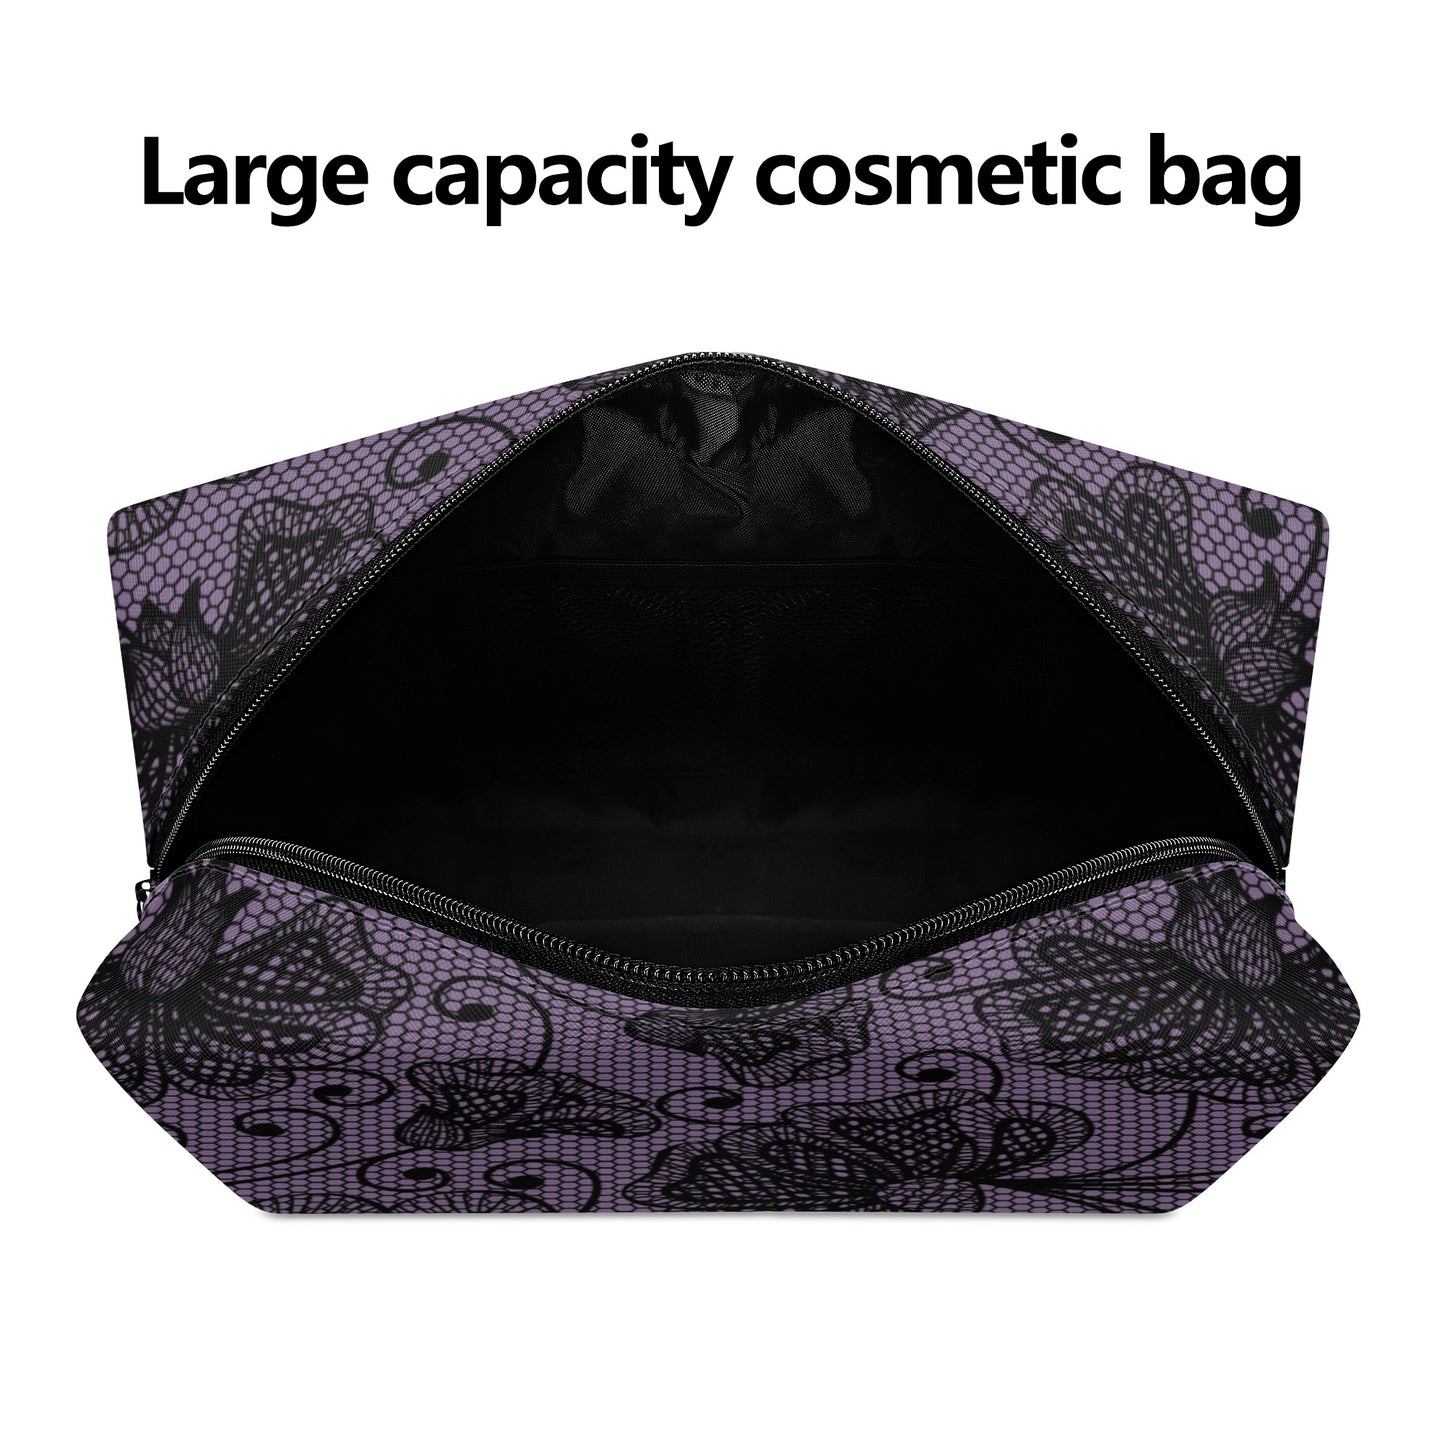 Lacey Purple Flower Leather Cosmetic Bag